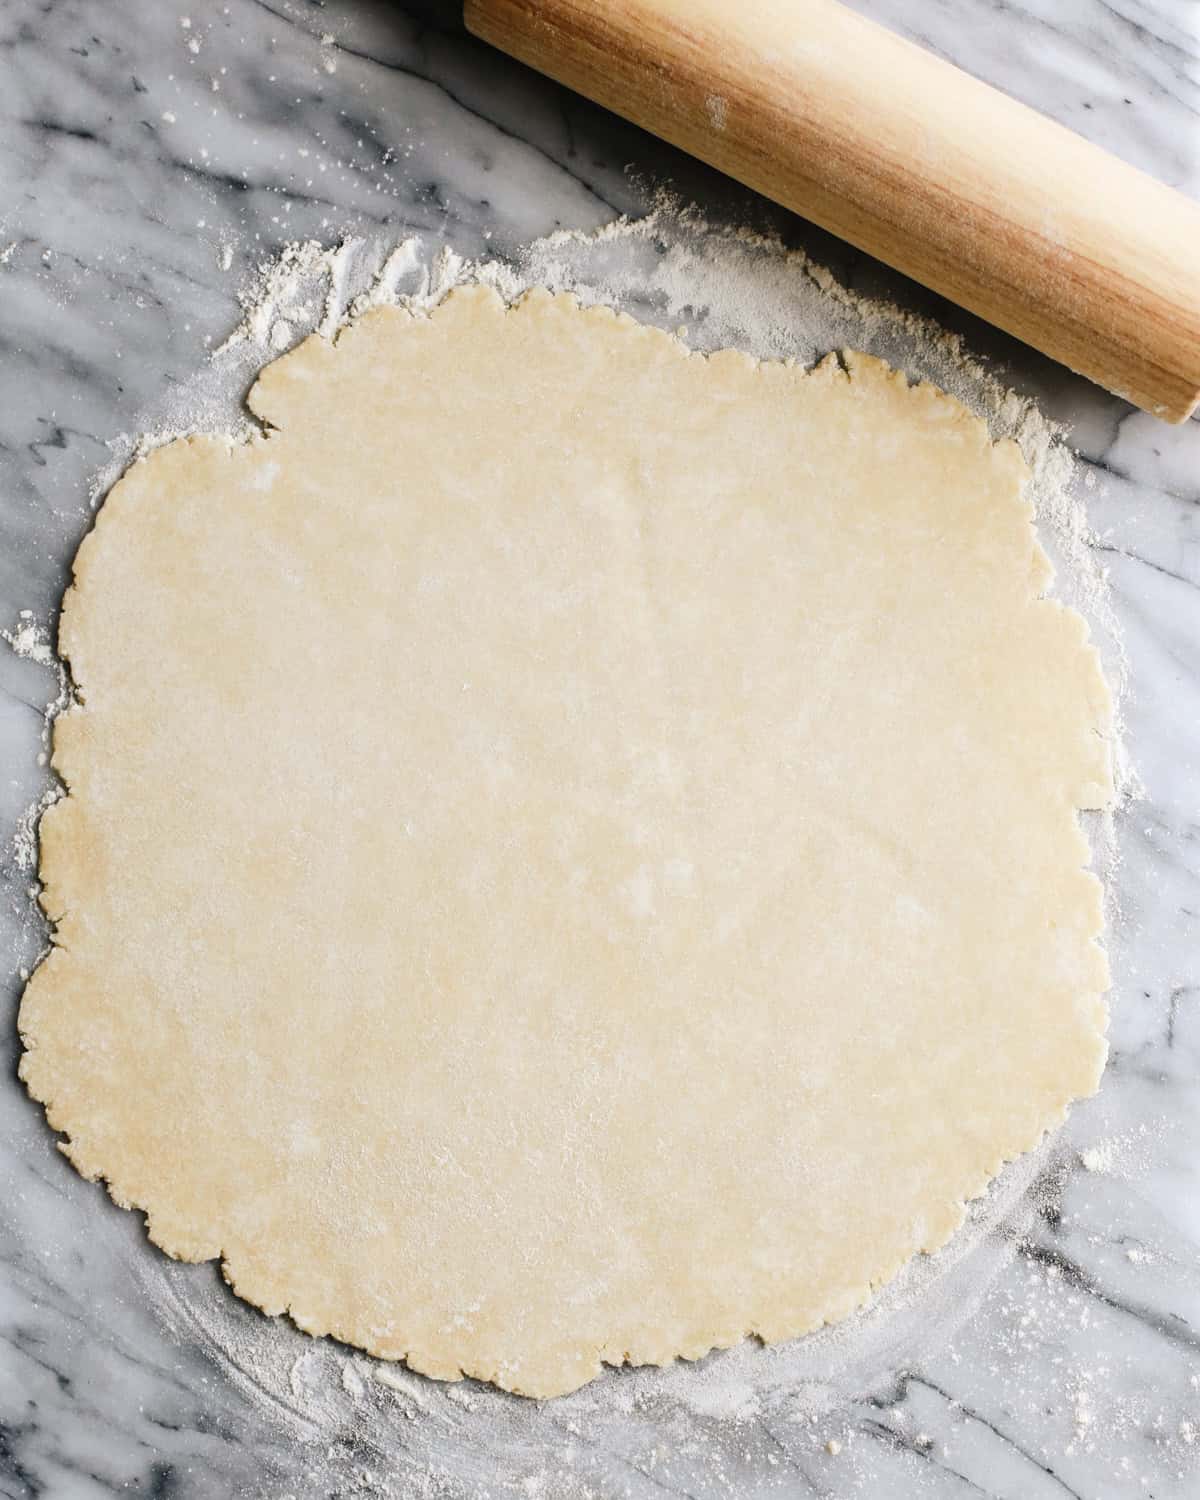 How to Make Pie Crust - dough in a disc before rolling